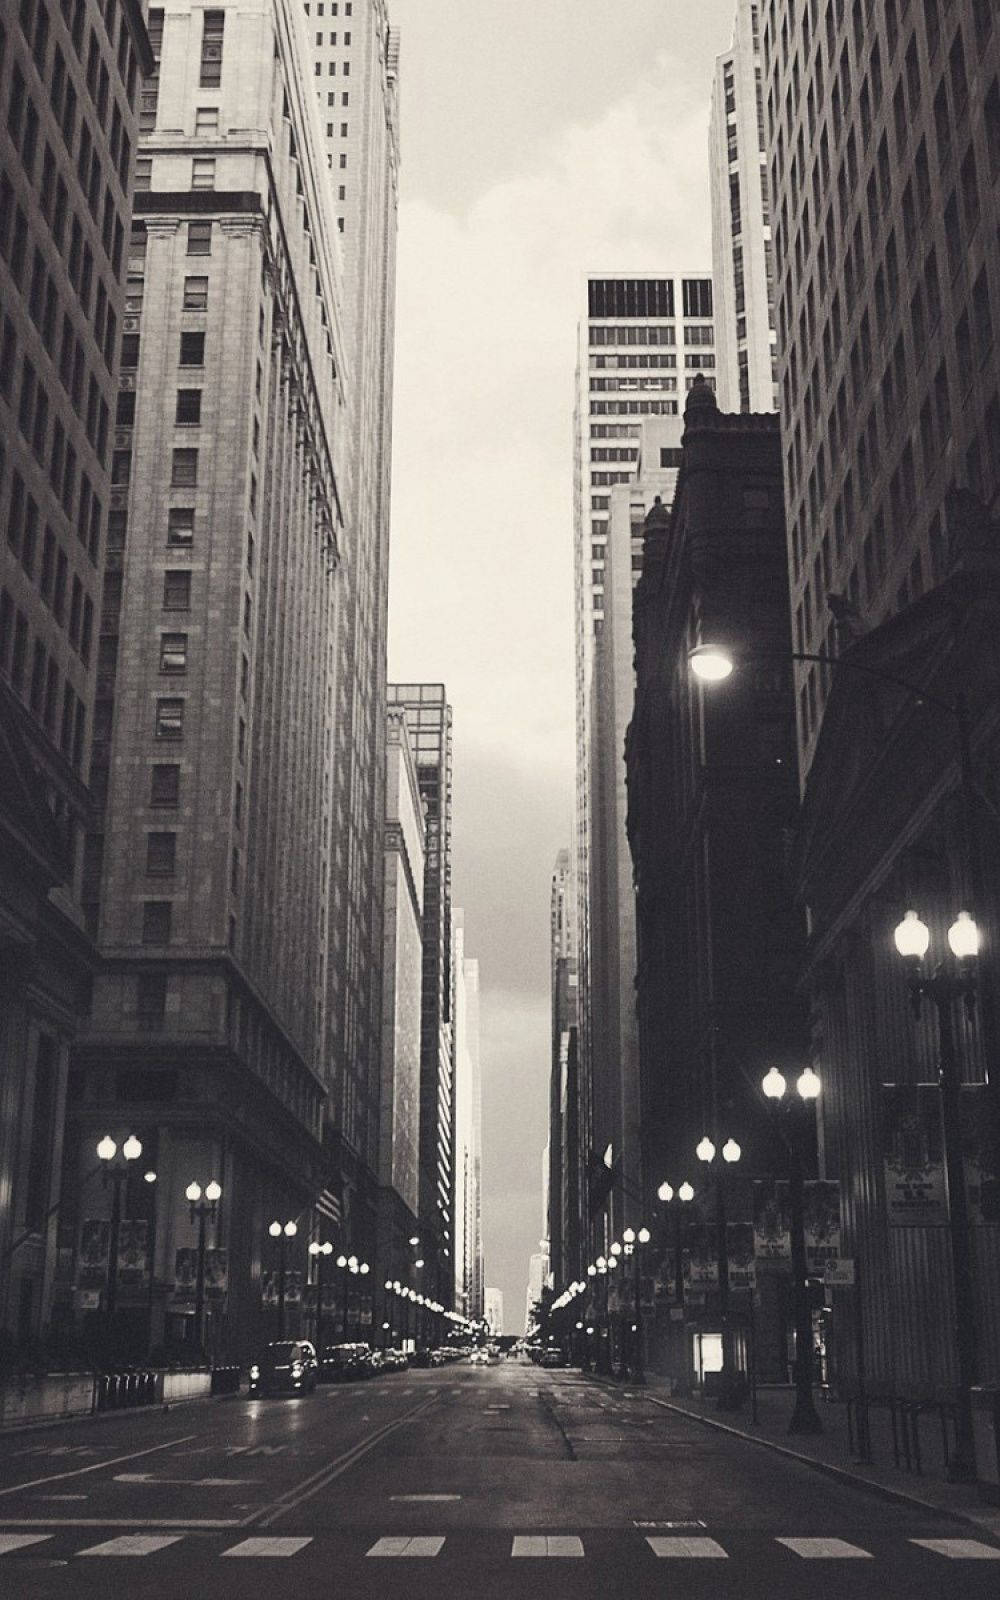 Download Lasalle Street Station Black White iPhone Wallpaper | Wallpapers .com